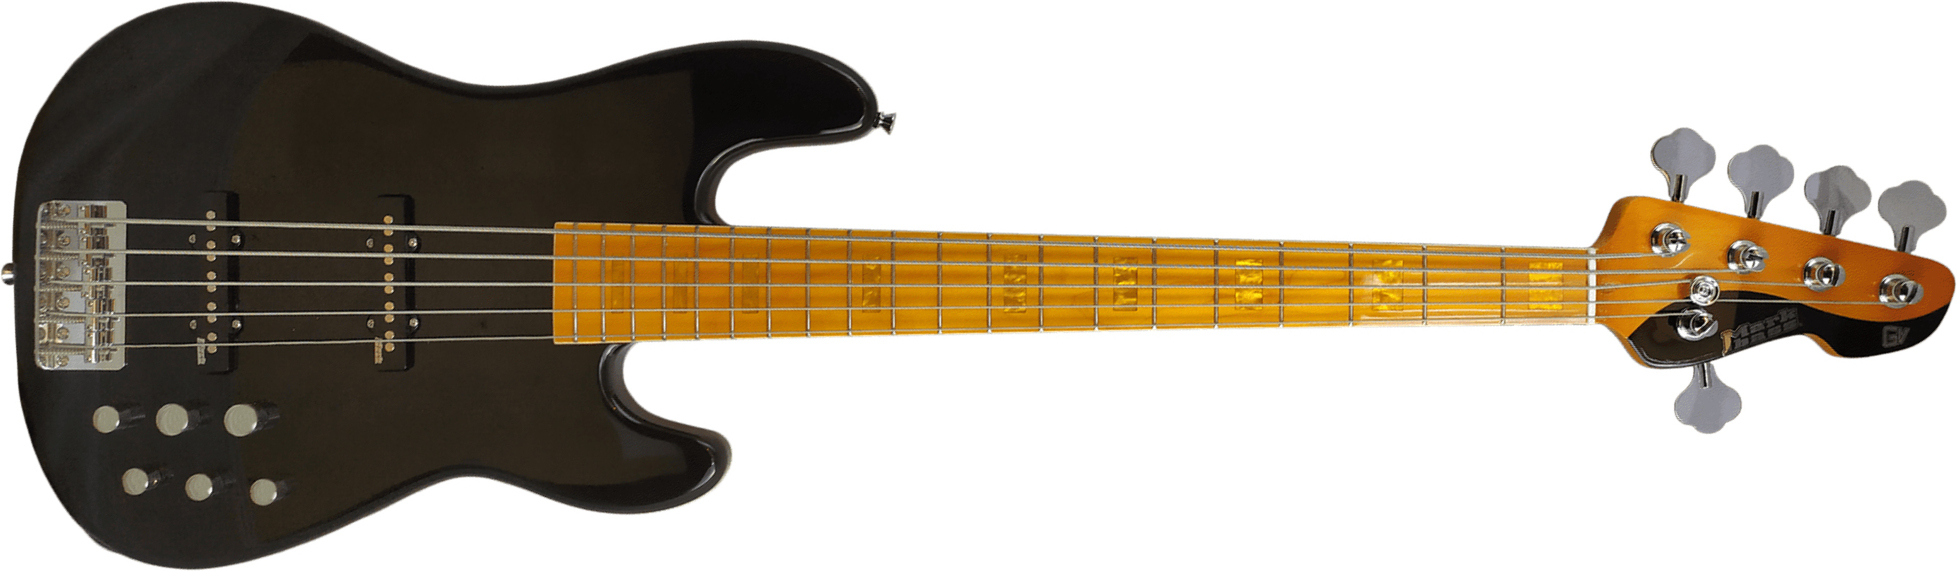 Markbass Mb Gv 5 Gloxy Val Cr Mp 5c Active Mn - Black - Solid body electric bass - Main picture